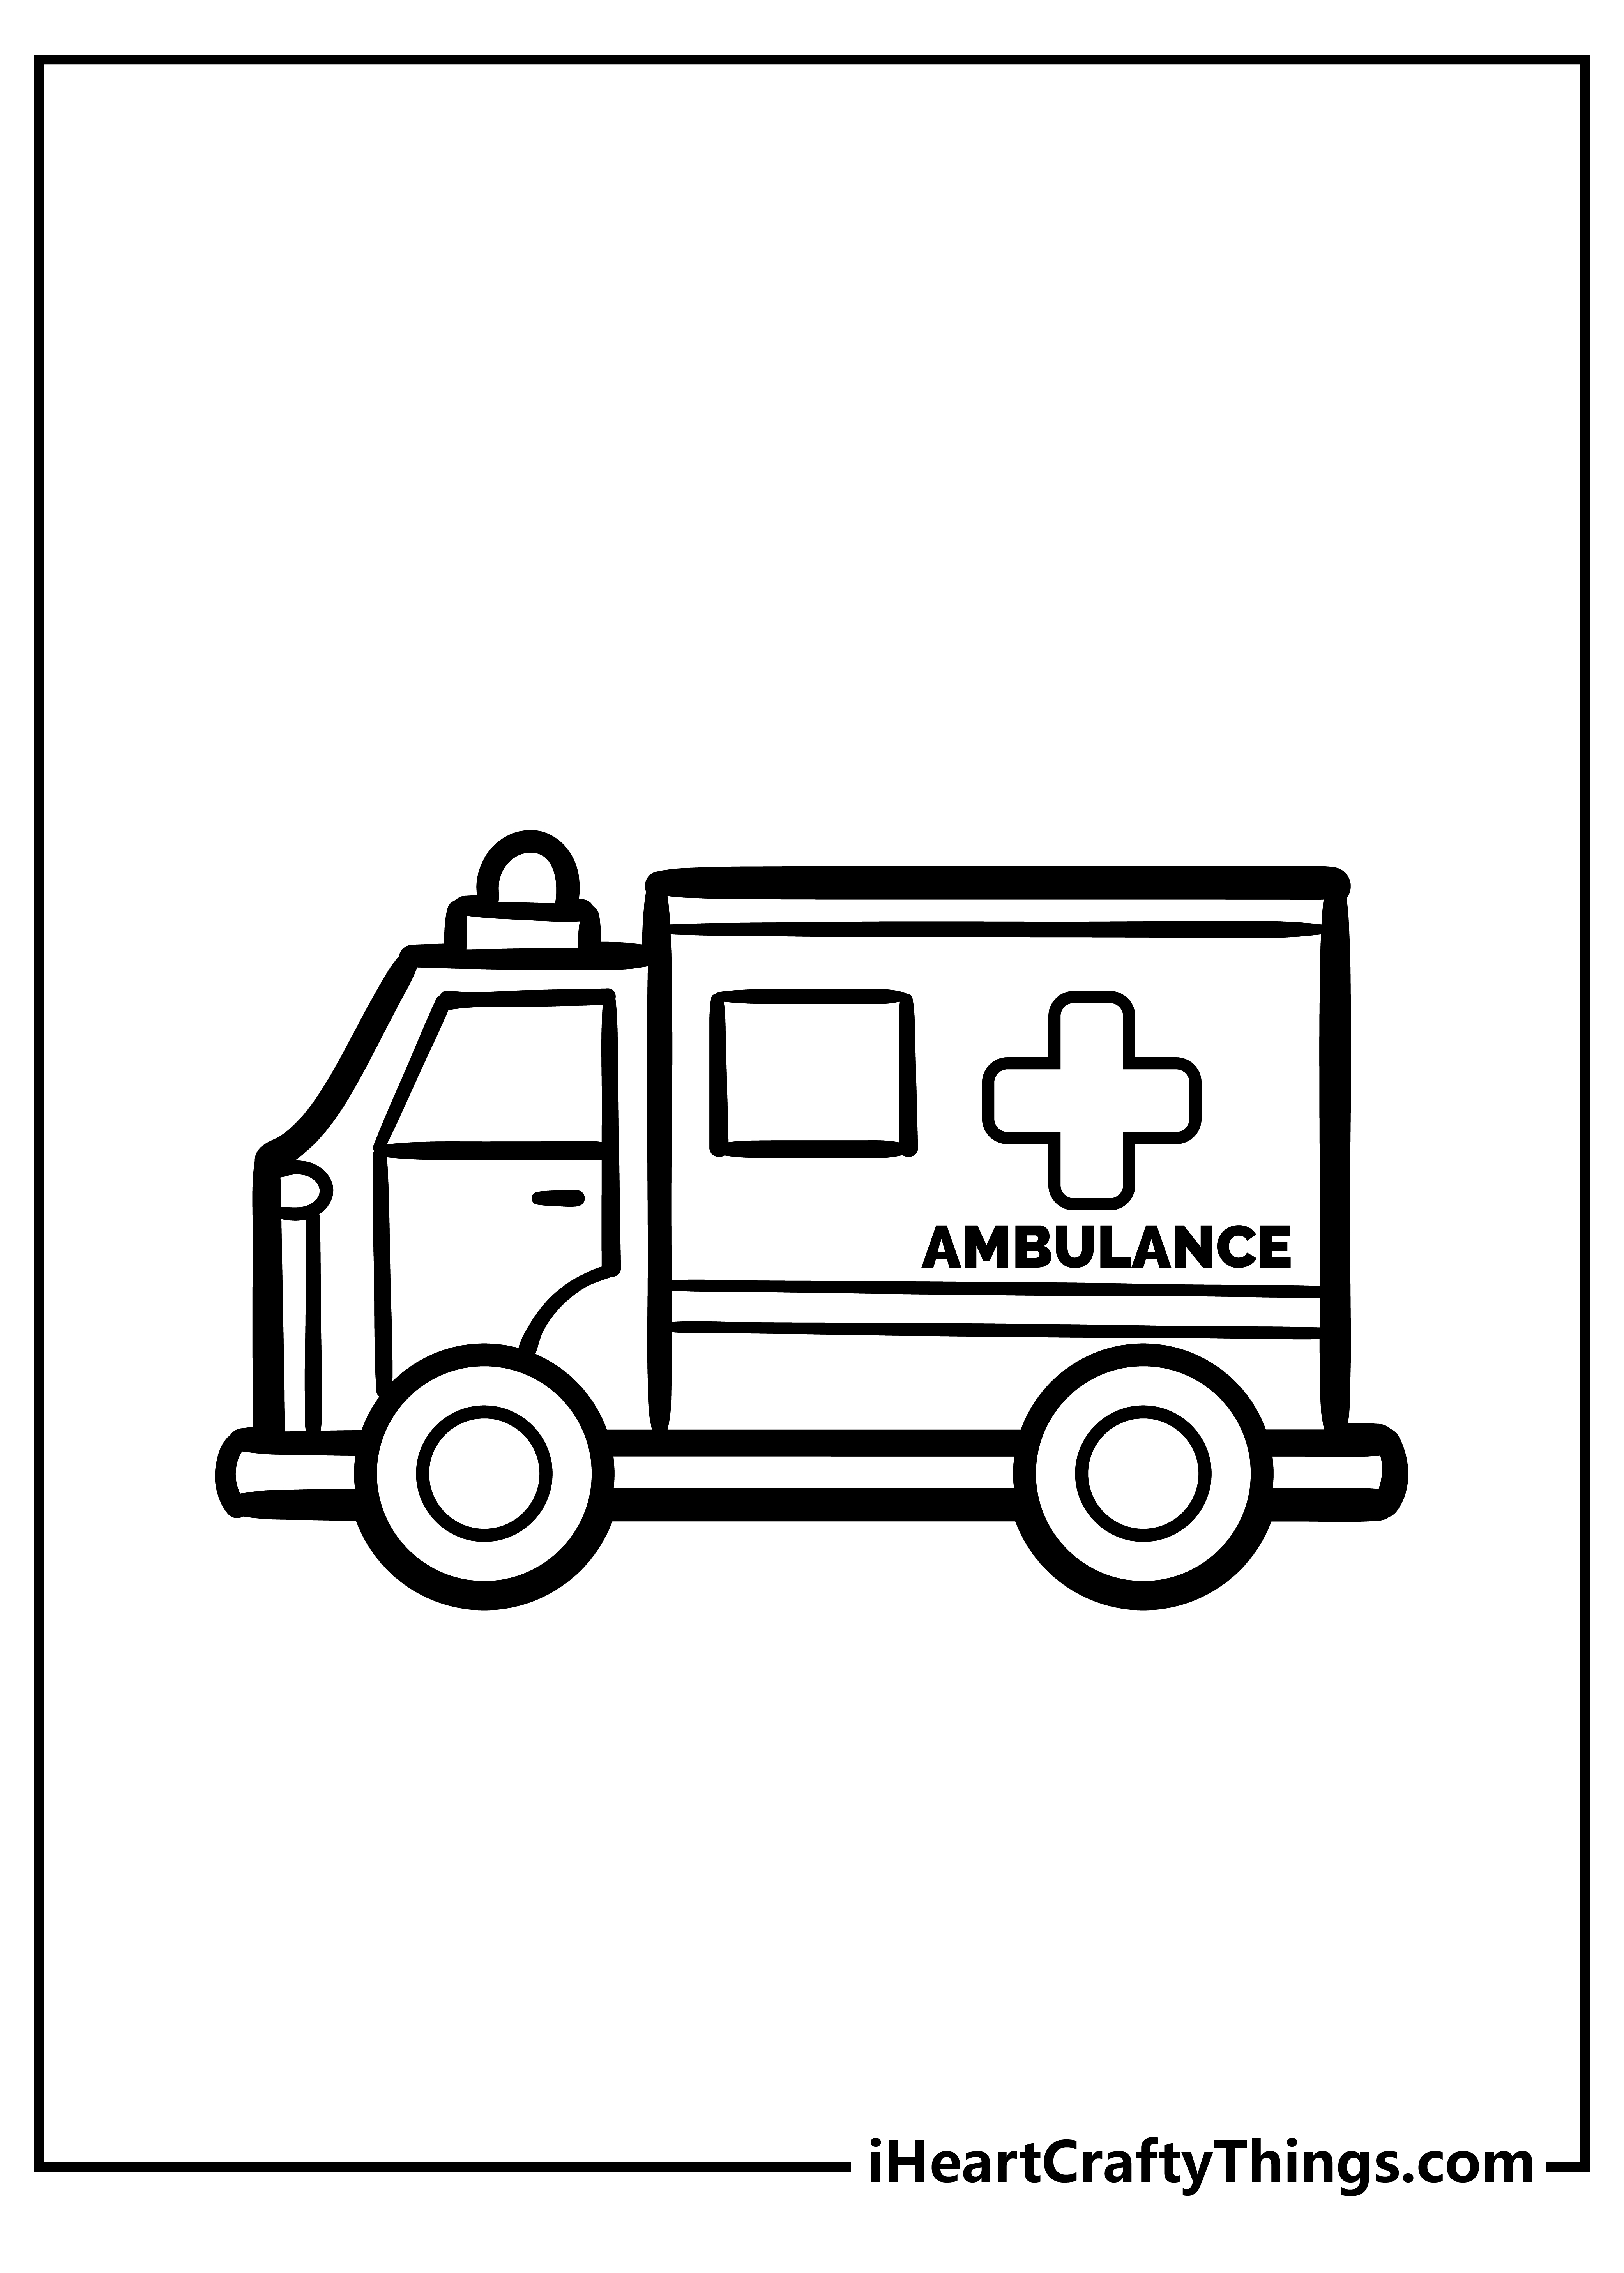 Ambulance Coloring Sheet for children free download